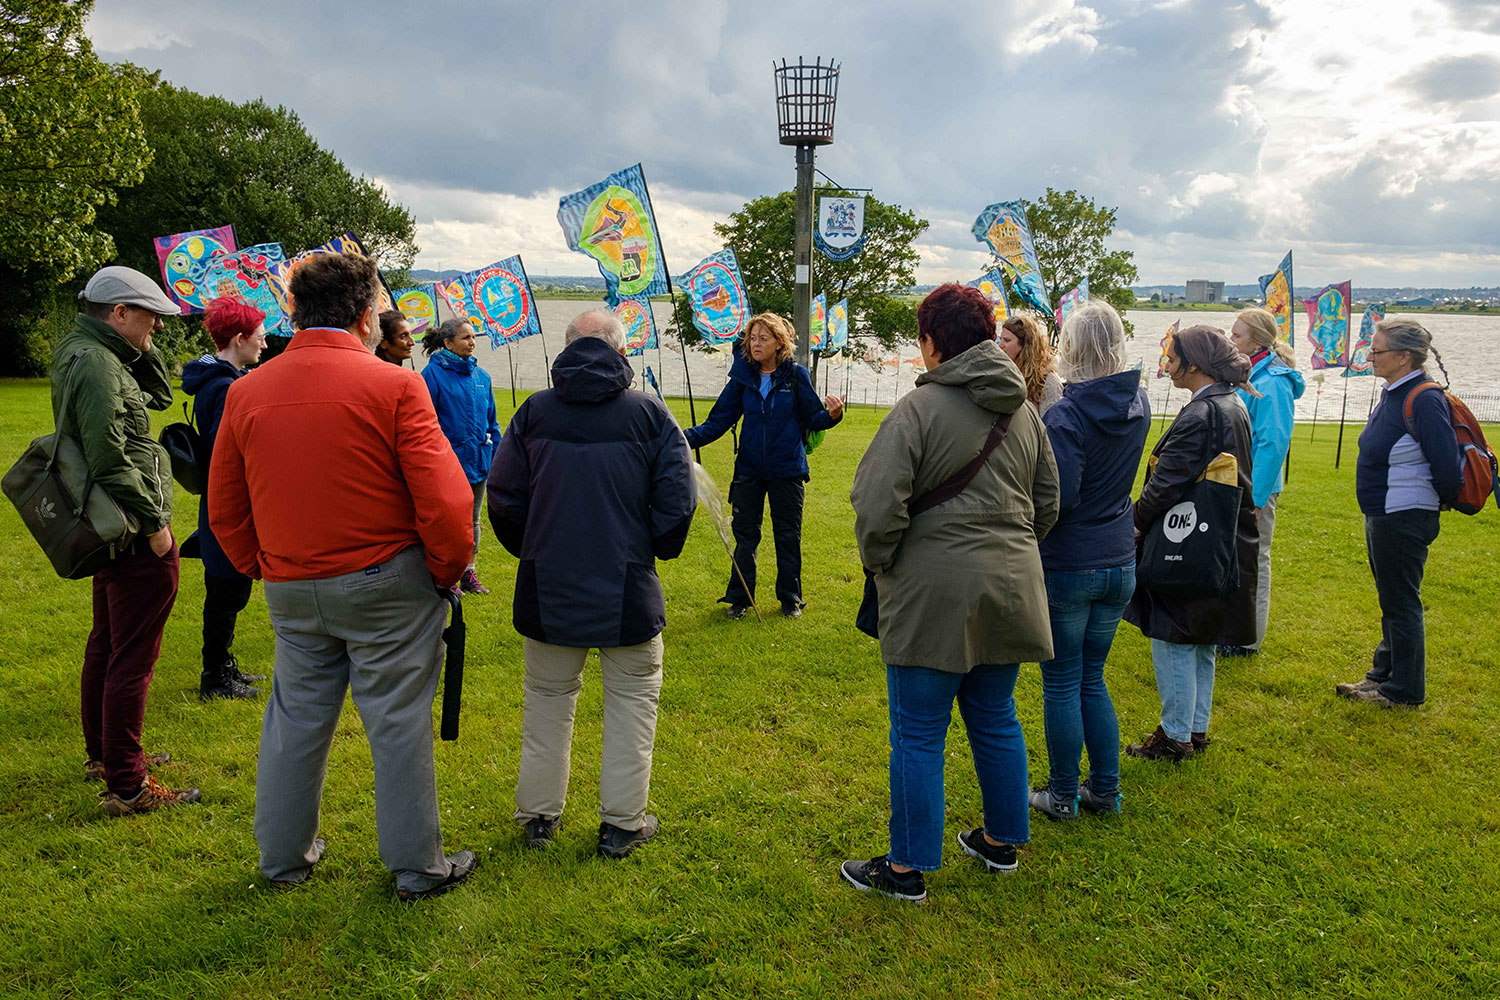 Ali Pretty speaks to a circle of people gathered on the grass in front of the Purfleet-on-Thames Beacon